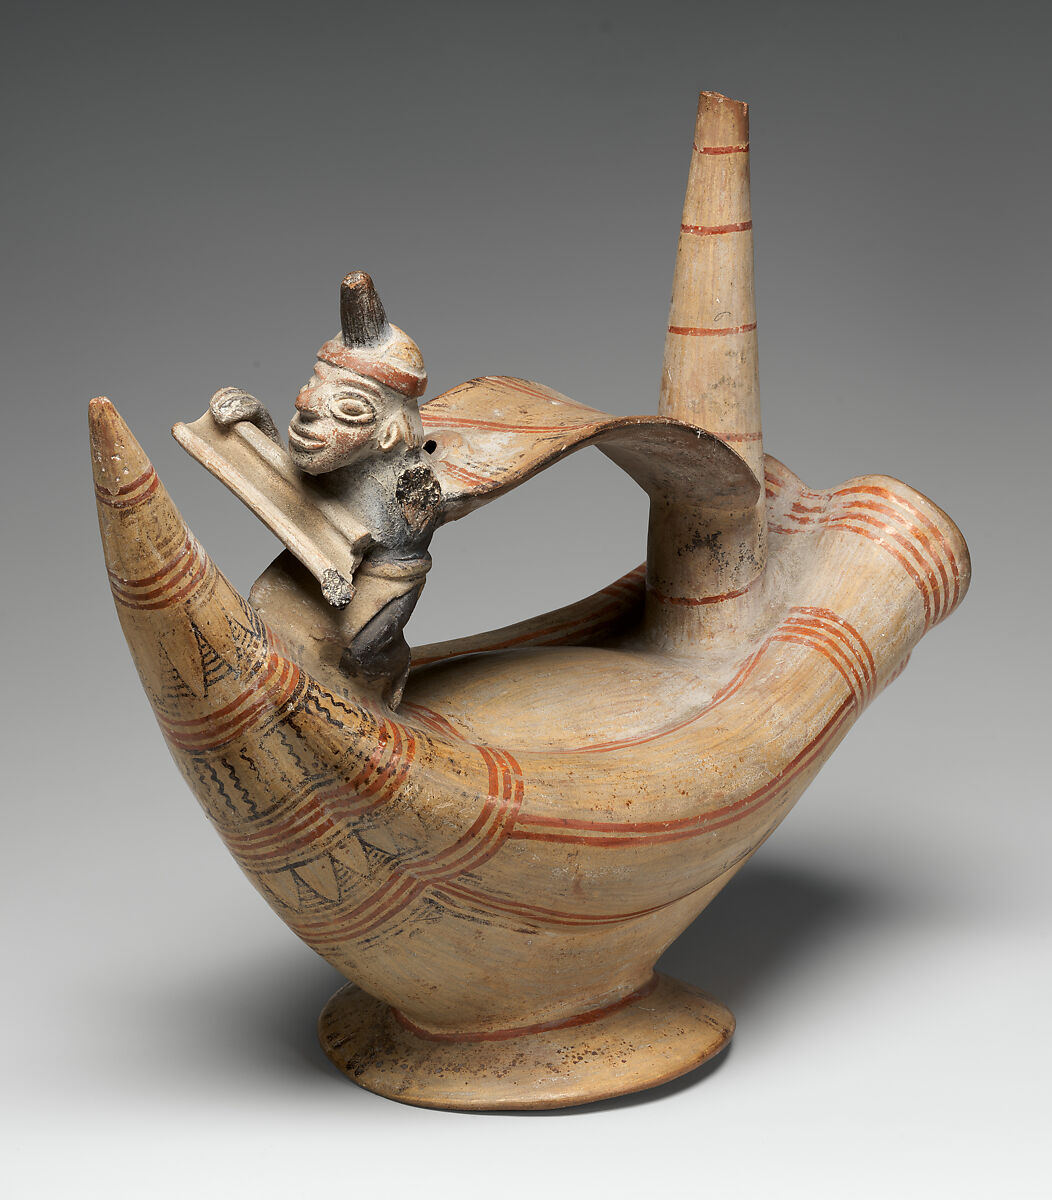 Bottle with a reed boat and paddler, Lambayeque (Sicán) artist(s), Ceramic, slip, post-fired pigment, Lambayeque (Sicán) 